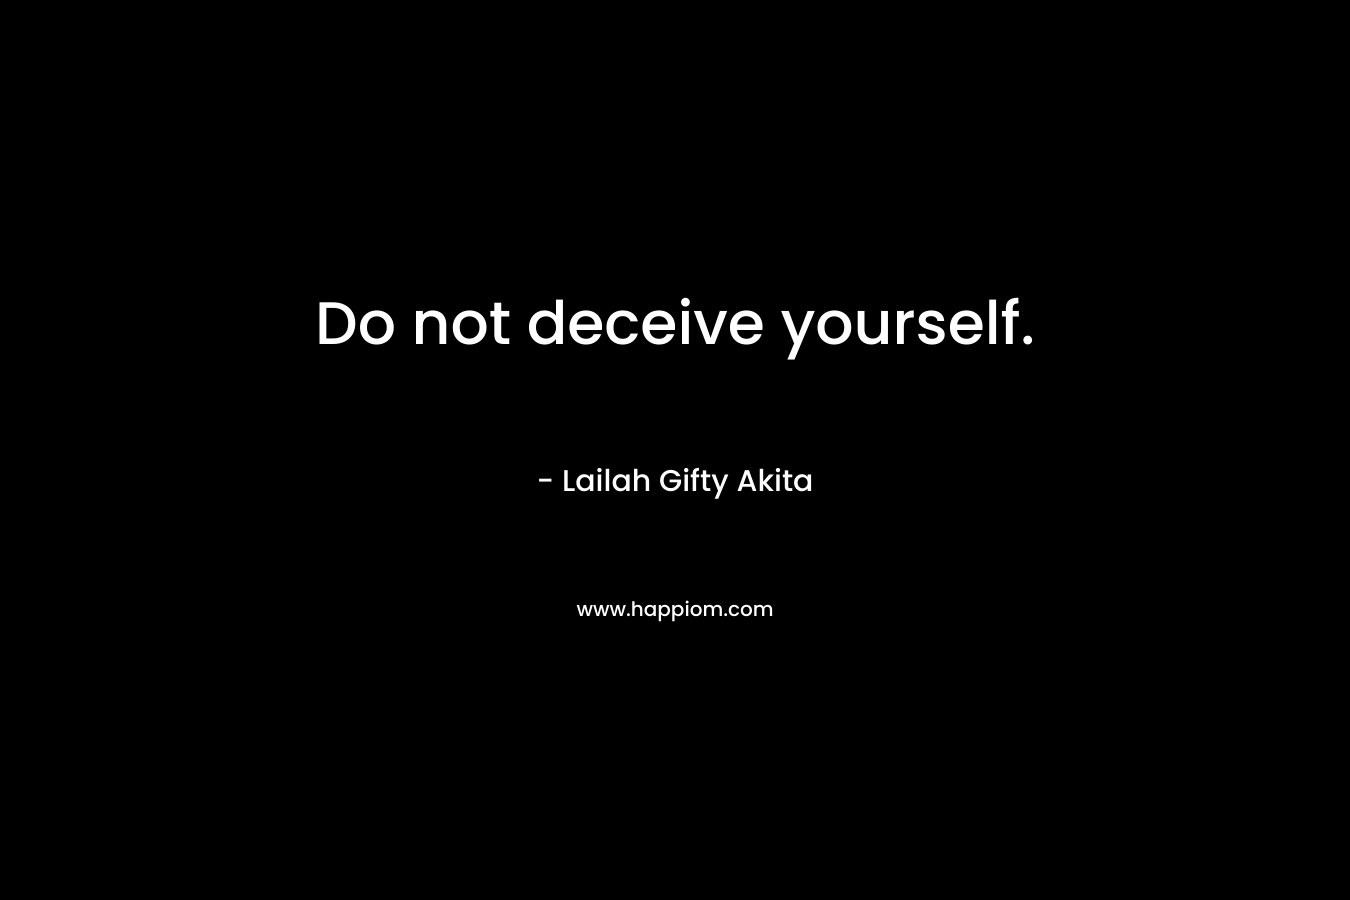 Do not deceive yourself.